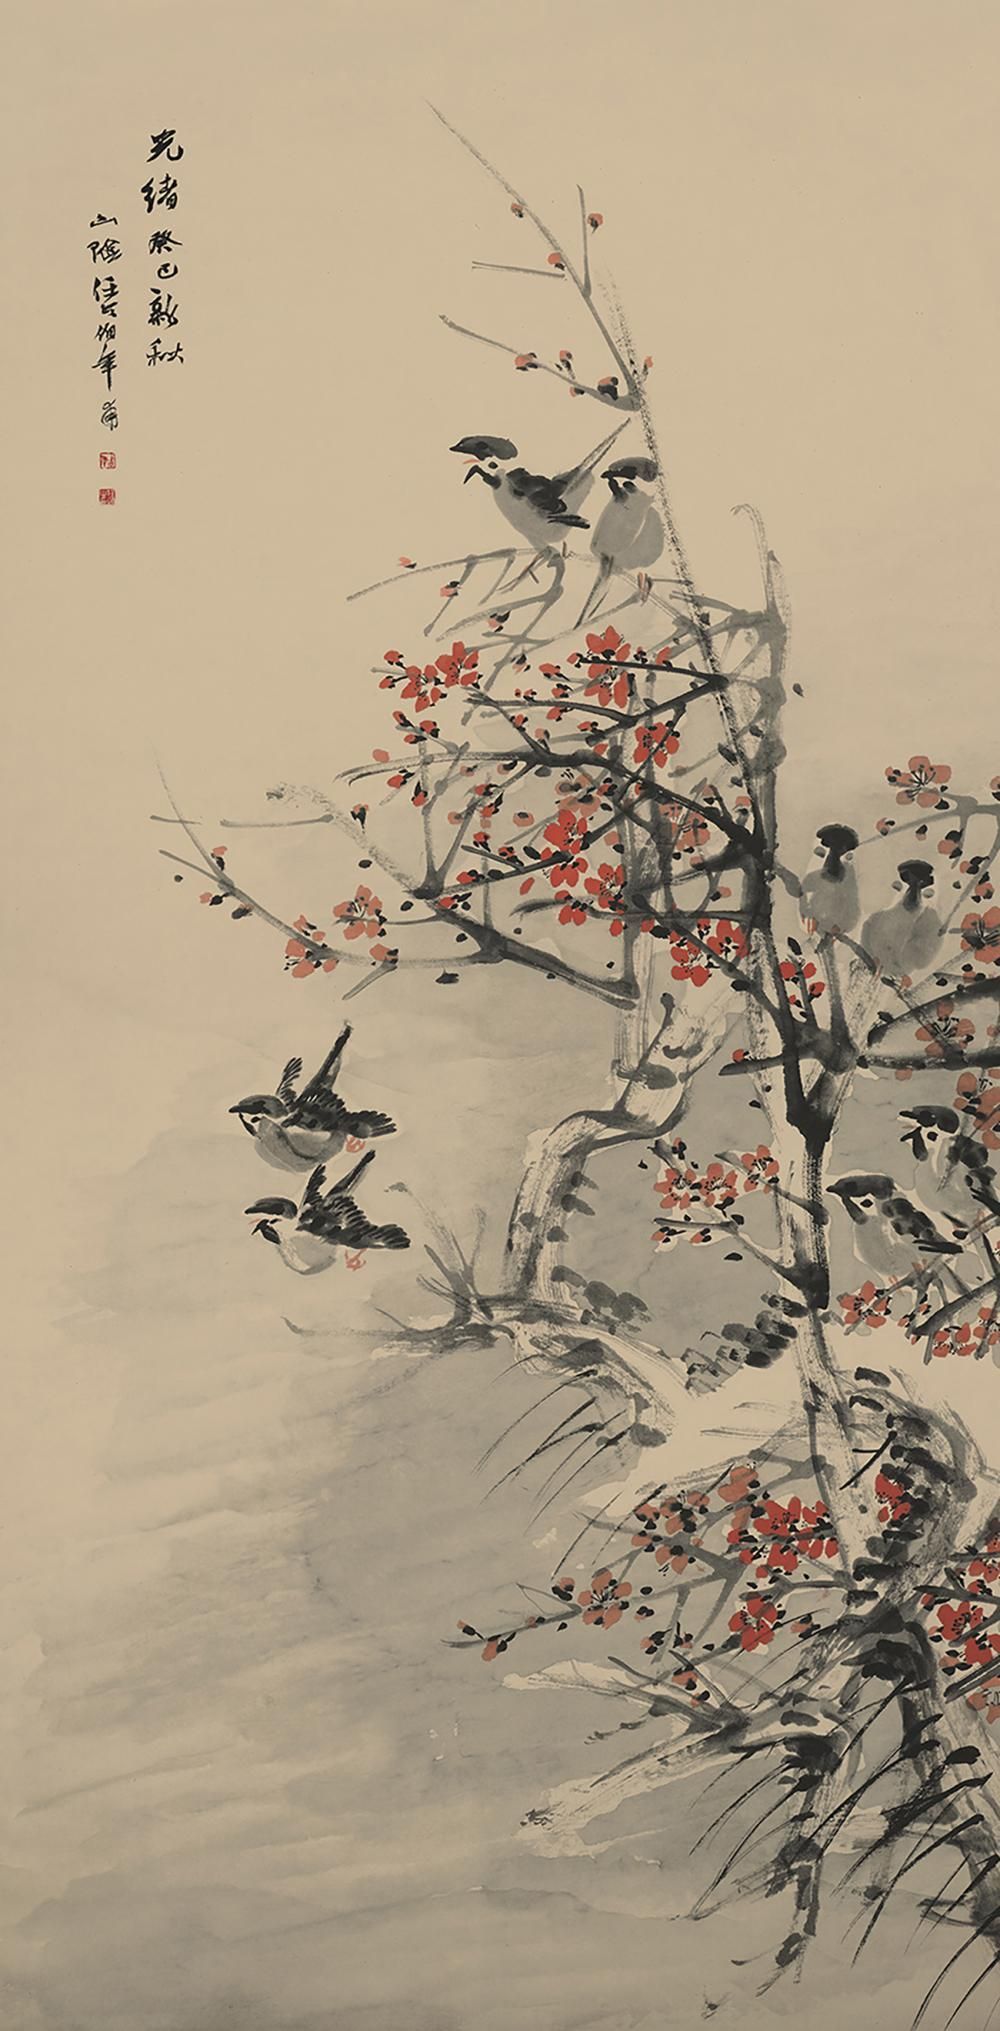 A Chinese Painting. Japanese art, Art wallpaper iphone, Chinese painting